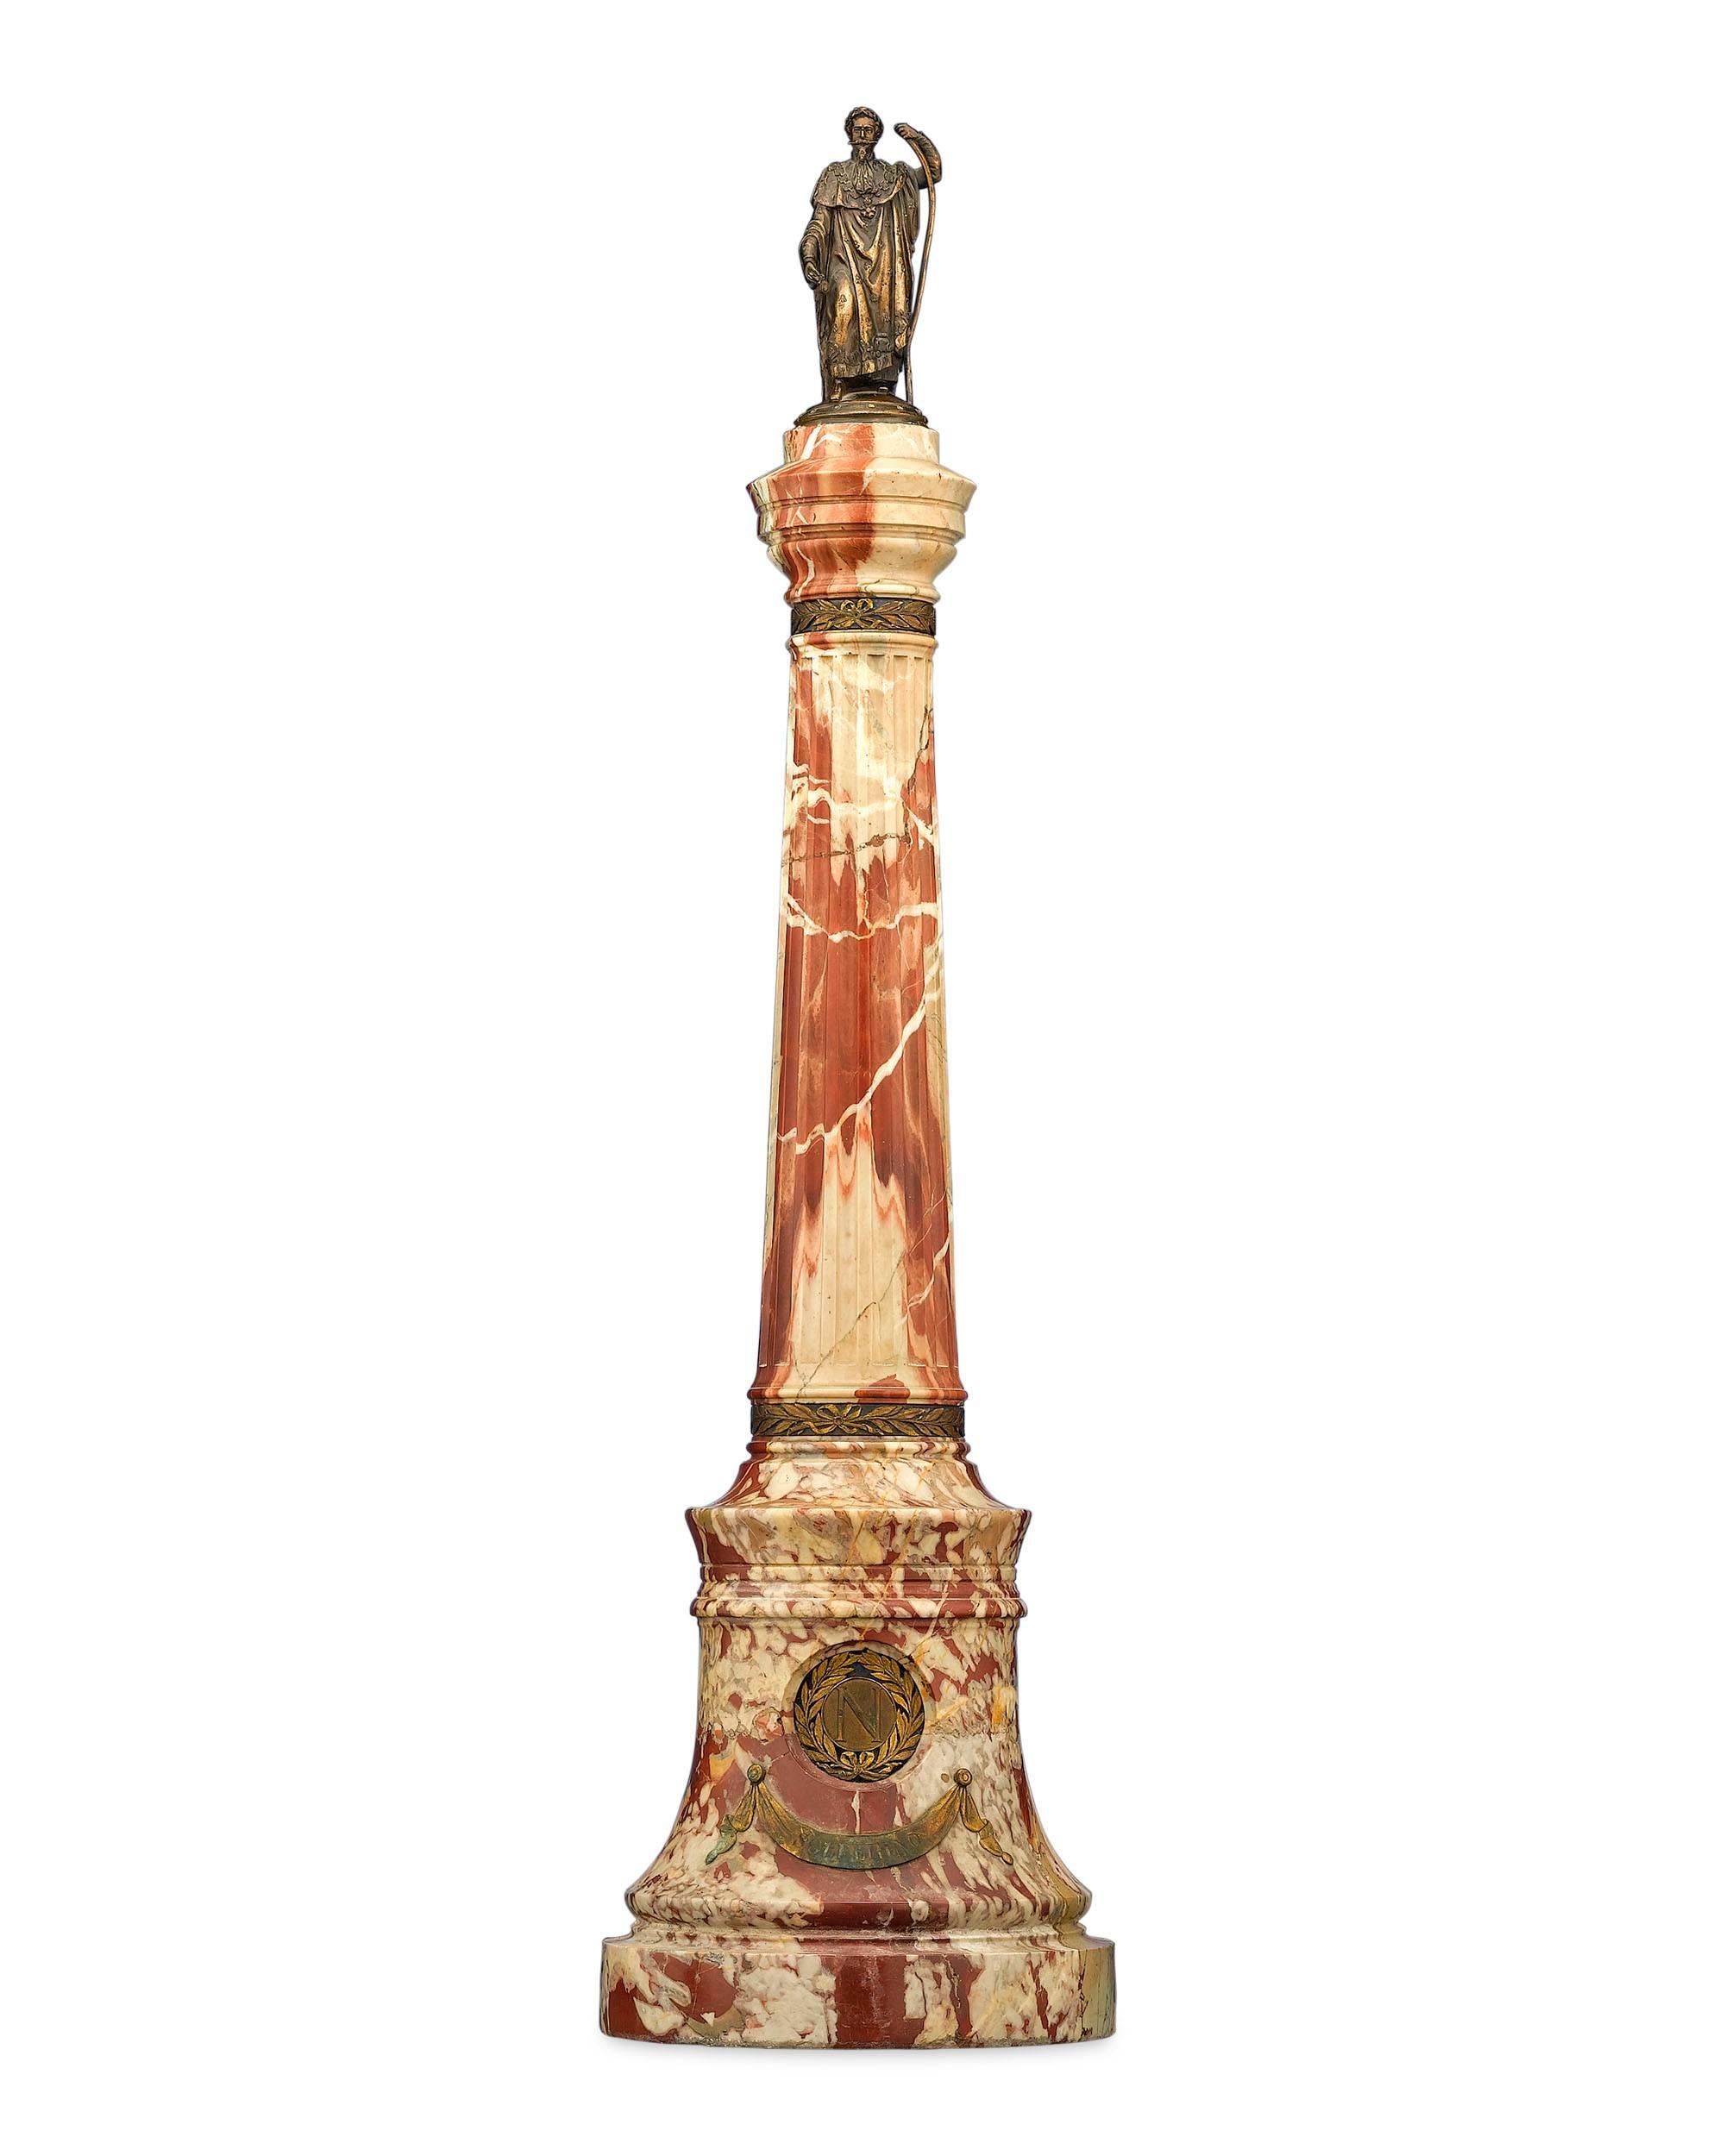 This bronze and marble statue commemorates French Emperor Napoleon III’s victory at the Battle of Solferino. The victory of the allied French Army under Napoleon III, who joined forces with Sardinian Army under Victor Emmanuel II (together known as